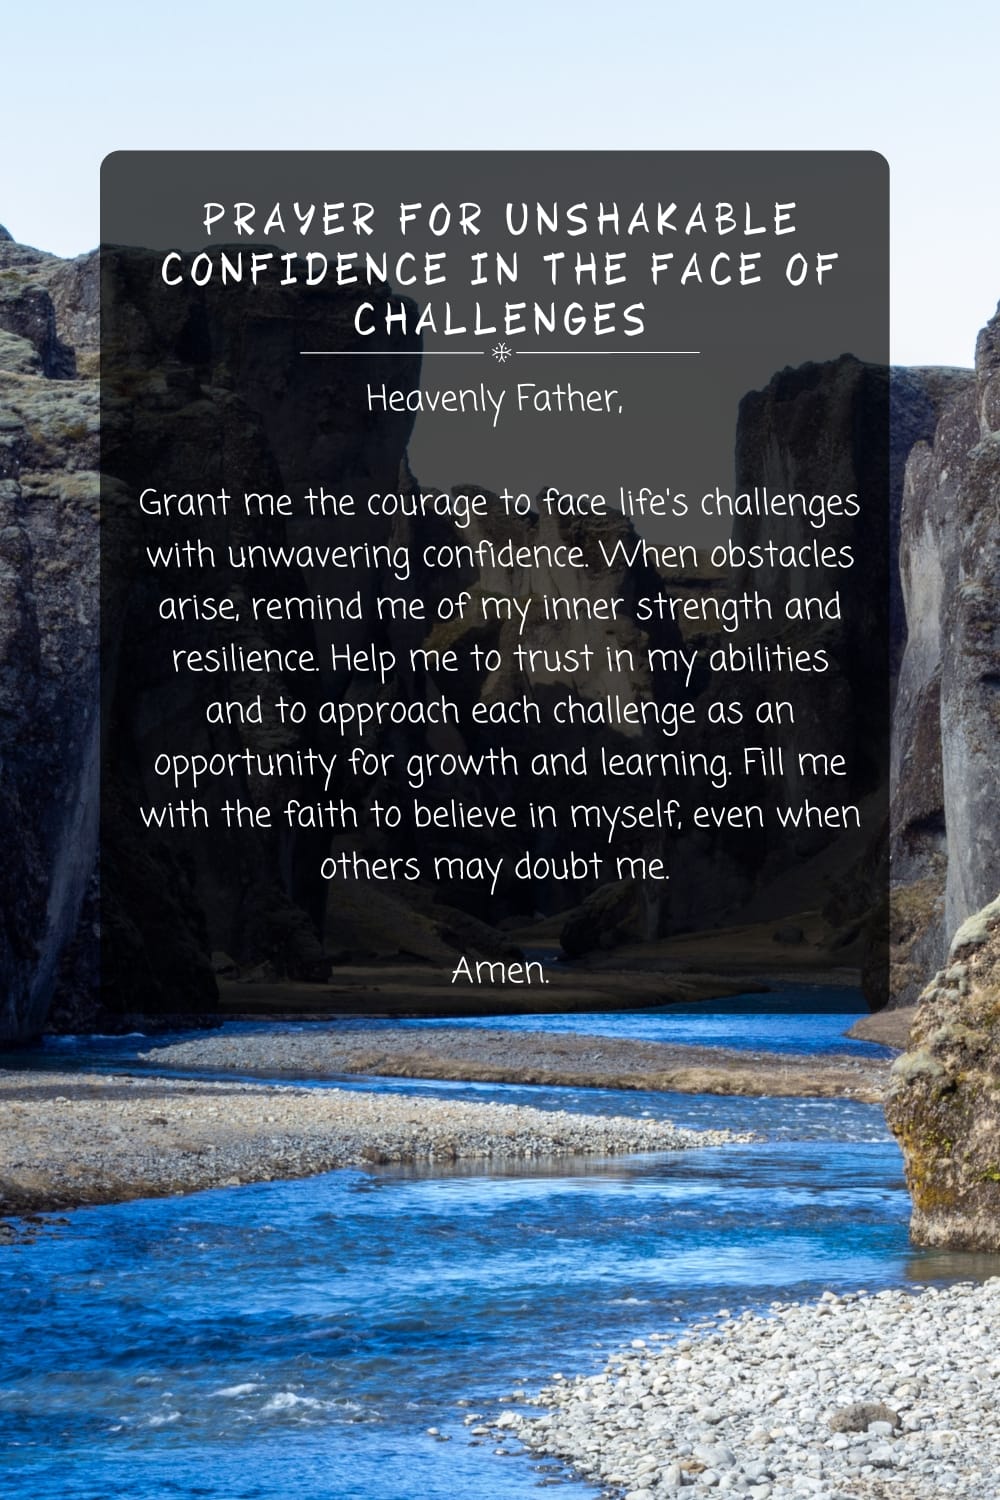 Prayer for Unshakable Confidence in the Face of Challenges